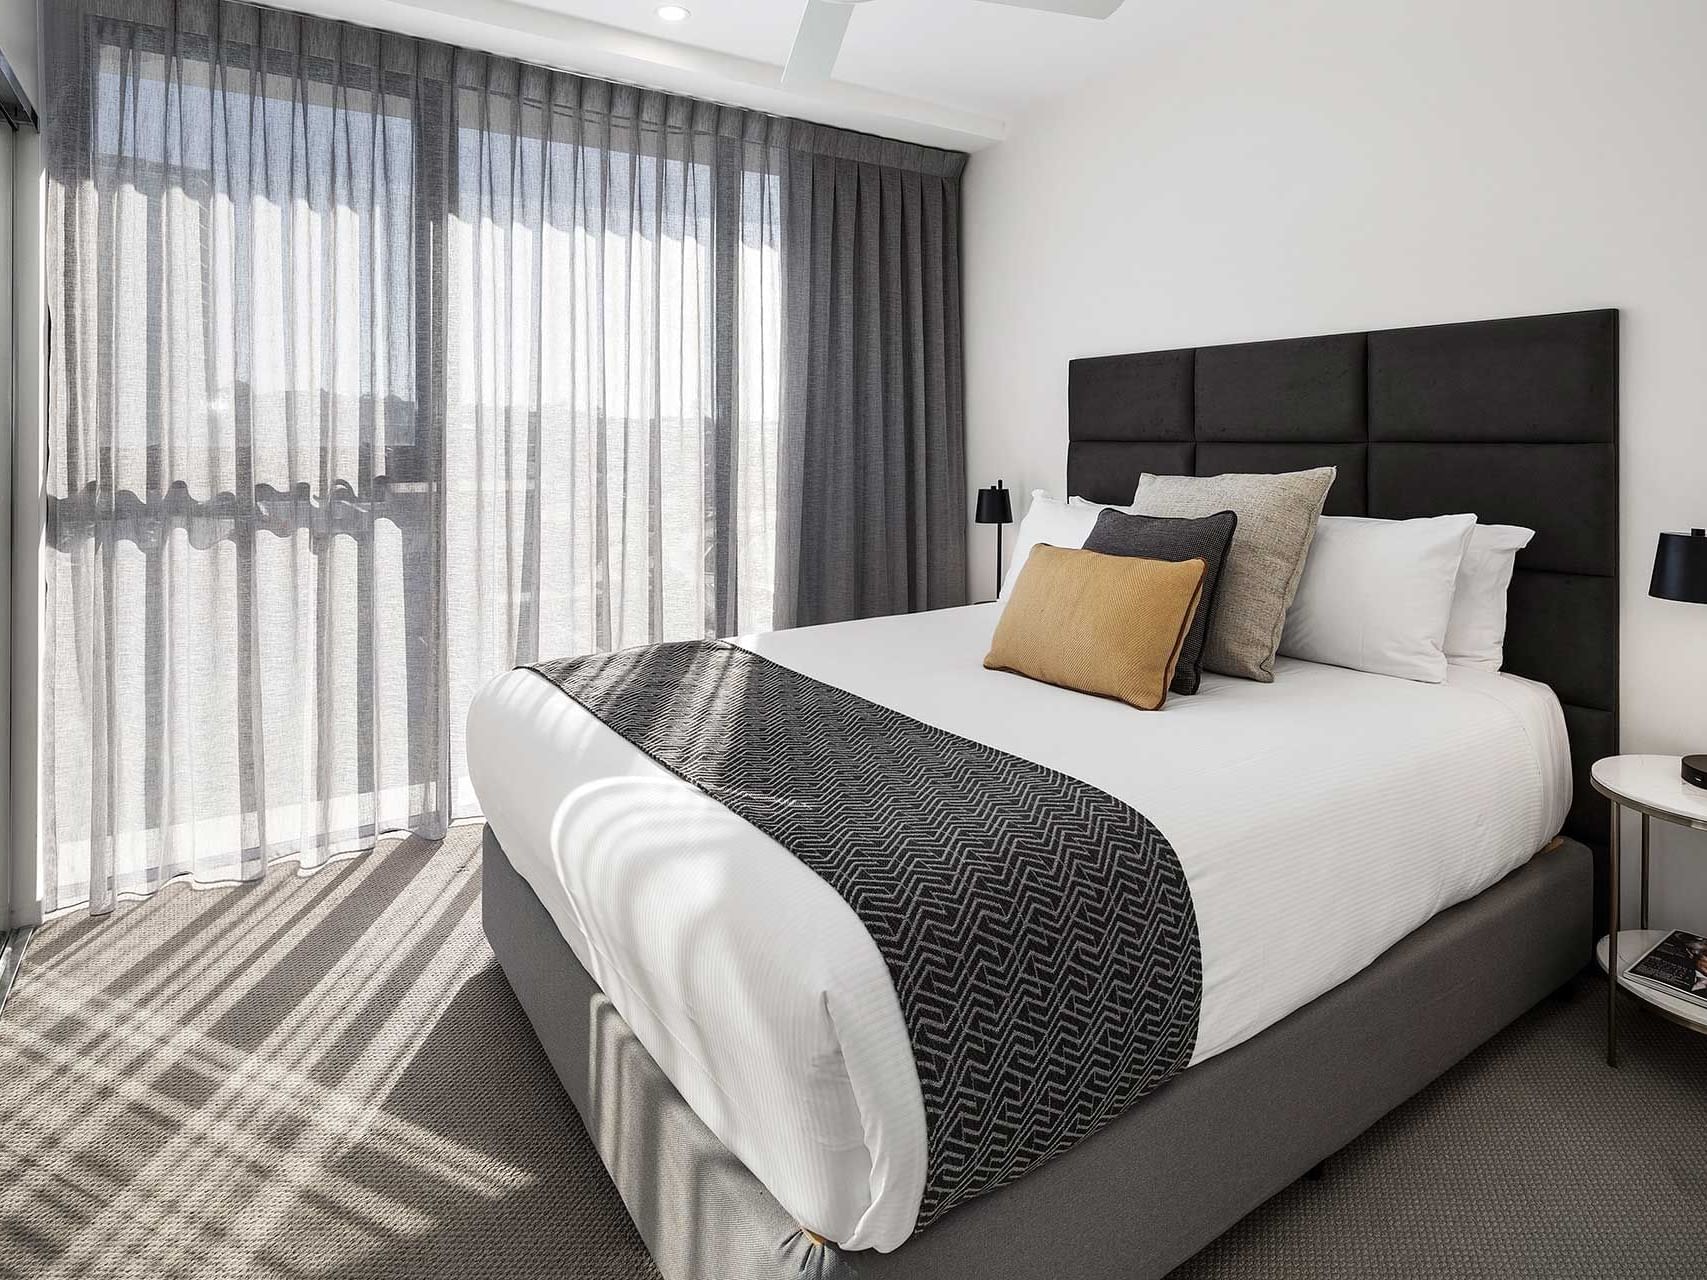 Executive One Bedroom, accommodation in Hamilton Brisbane at Alcyone Hotel Residences